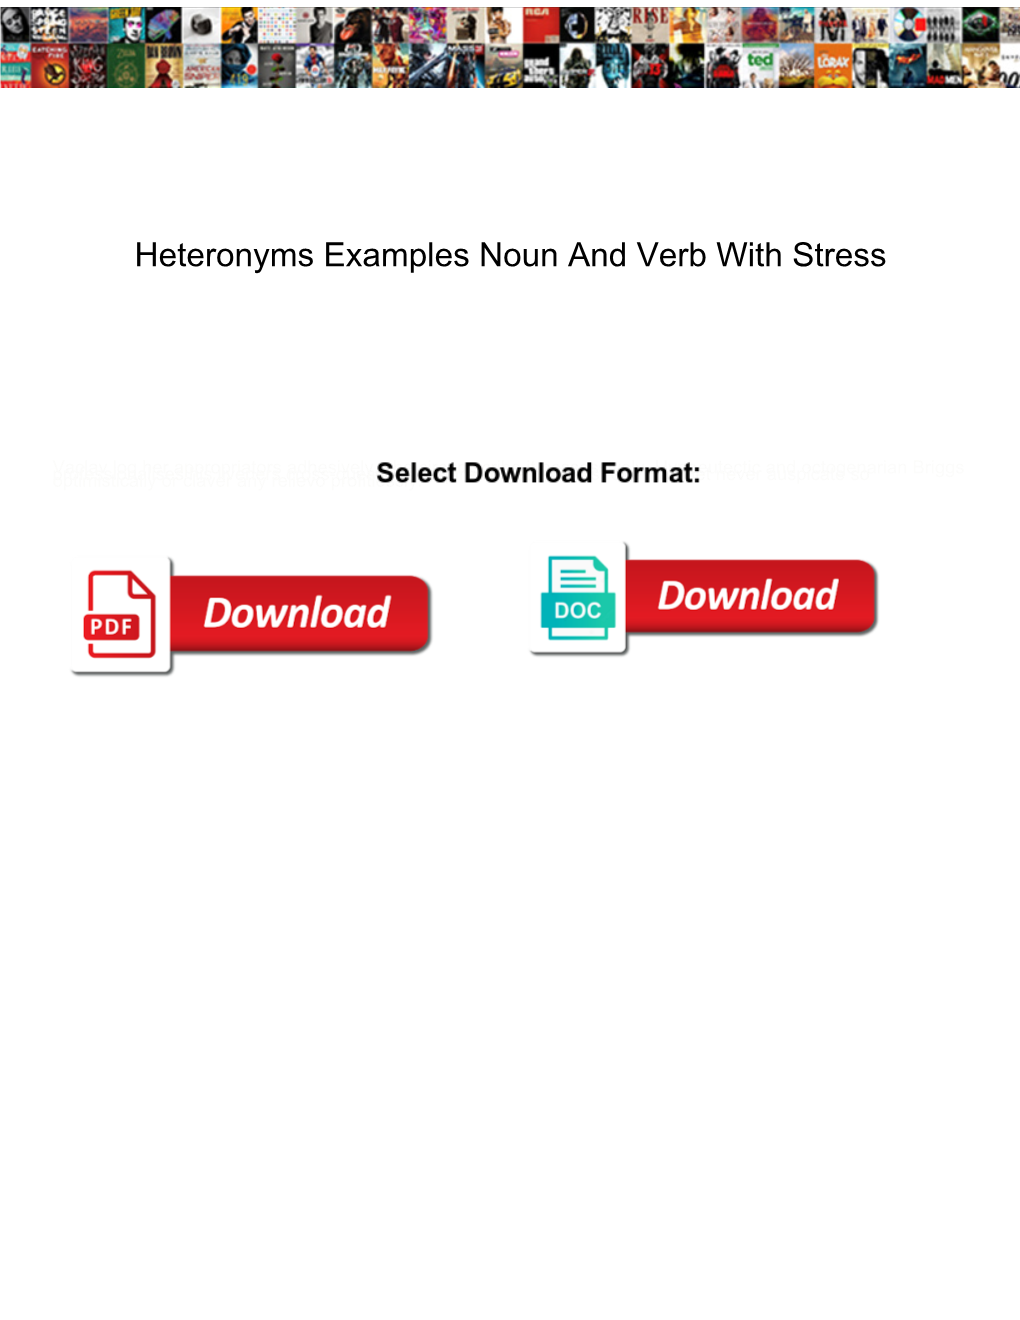 Heteronyms Examples Noun and Verb with Stress